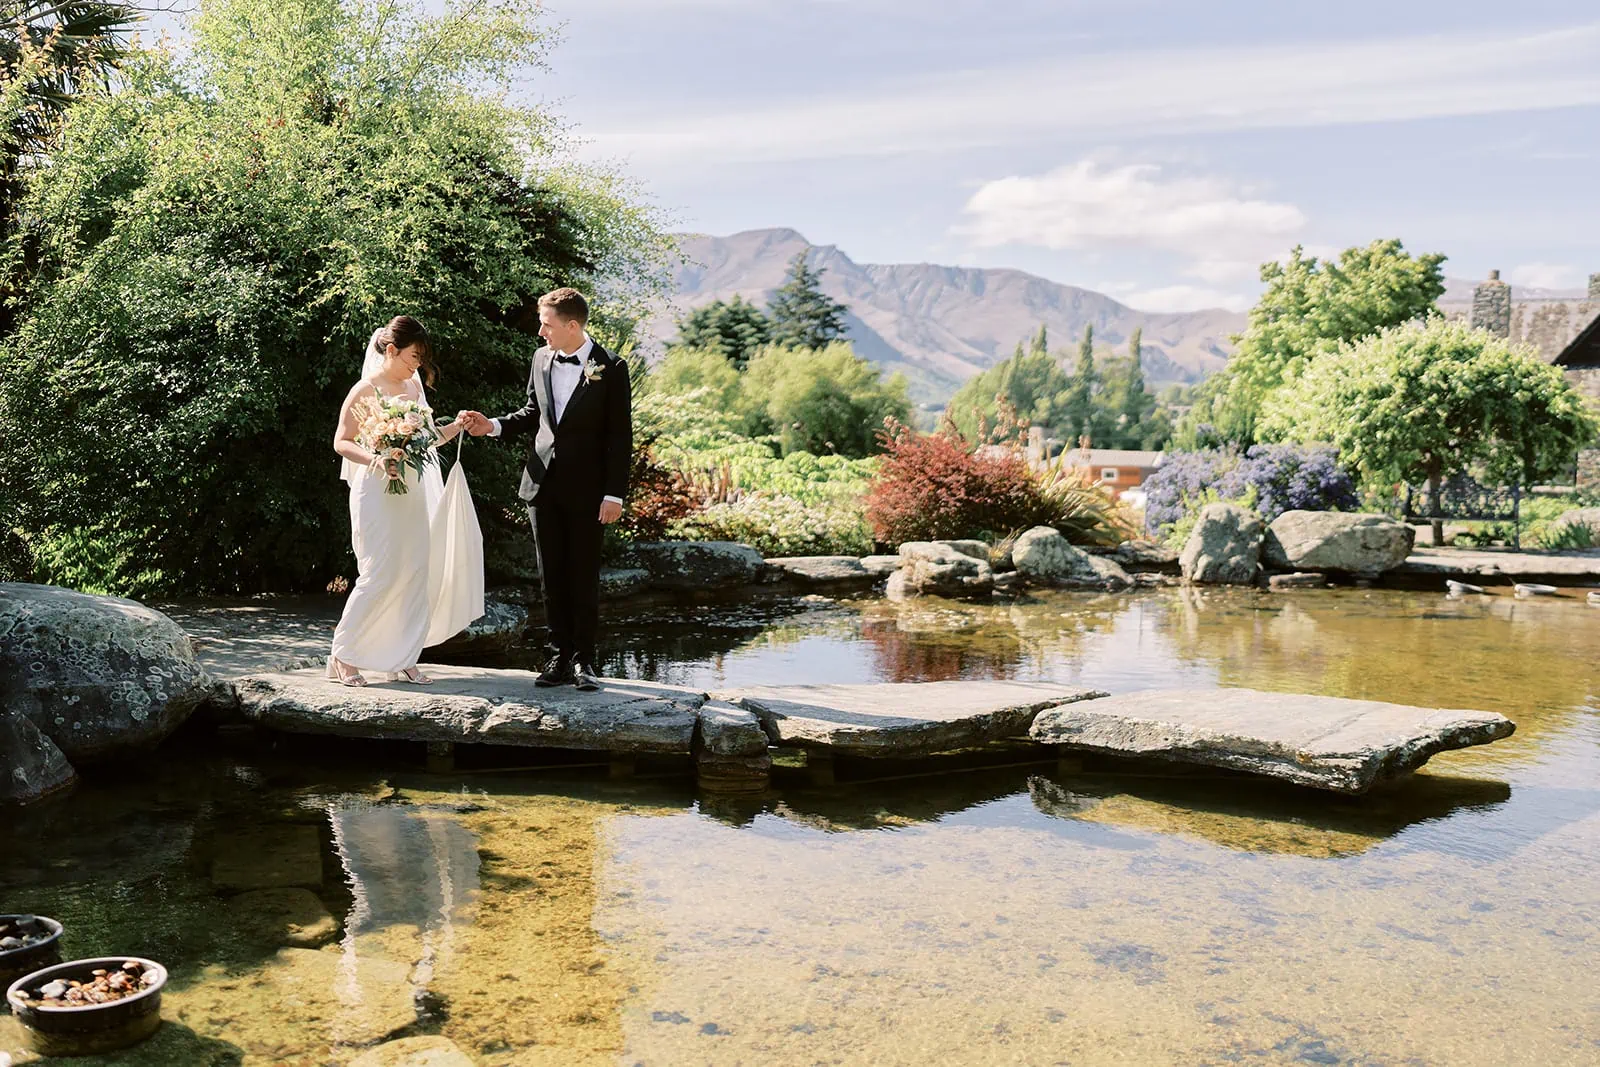 Queenstown Elopement Heli Wedding Photographer クイーンズタウン結婚式 | MJ, the bride, and Shane, the groom, standing in front of a picturesque pond at Stoneridge wedding venue.